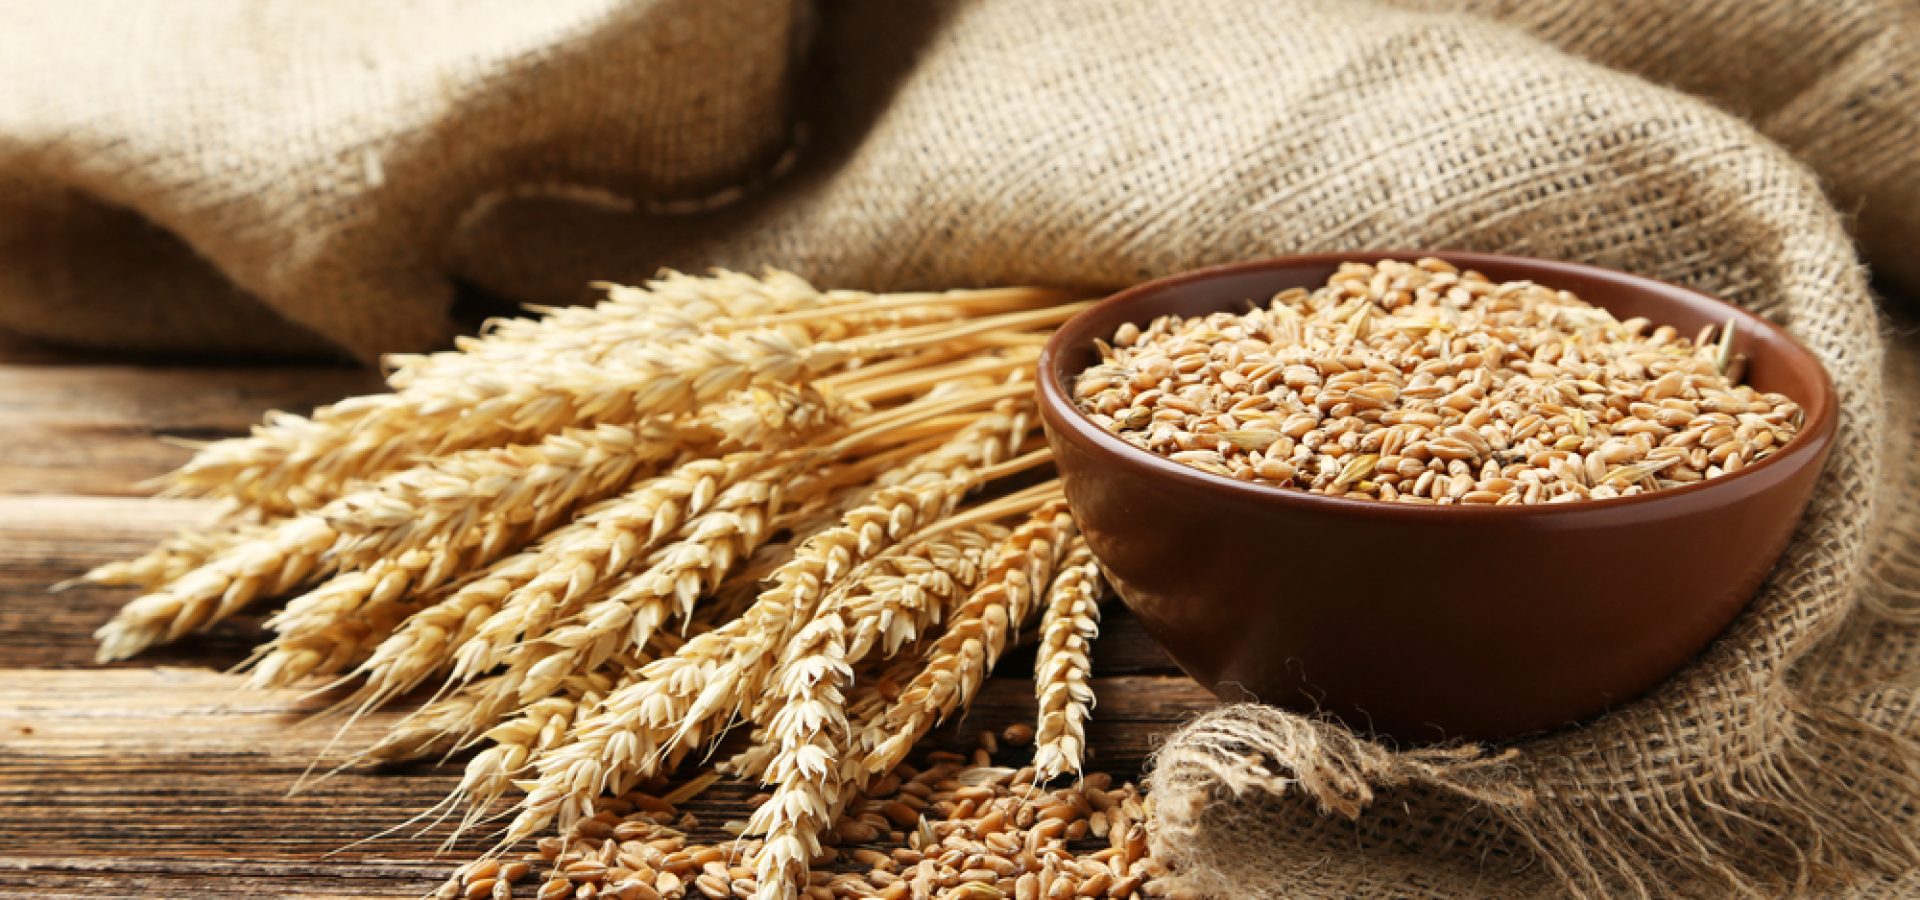 Wheat prices down on Russia-Ukraine ceasefire hopes